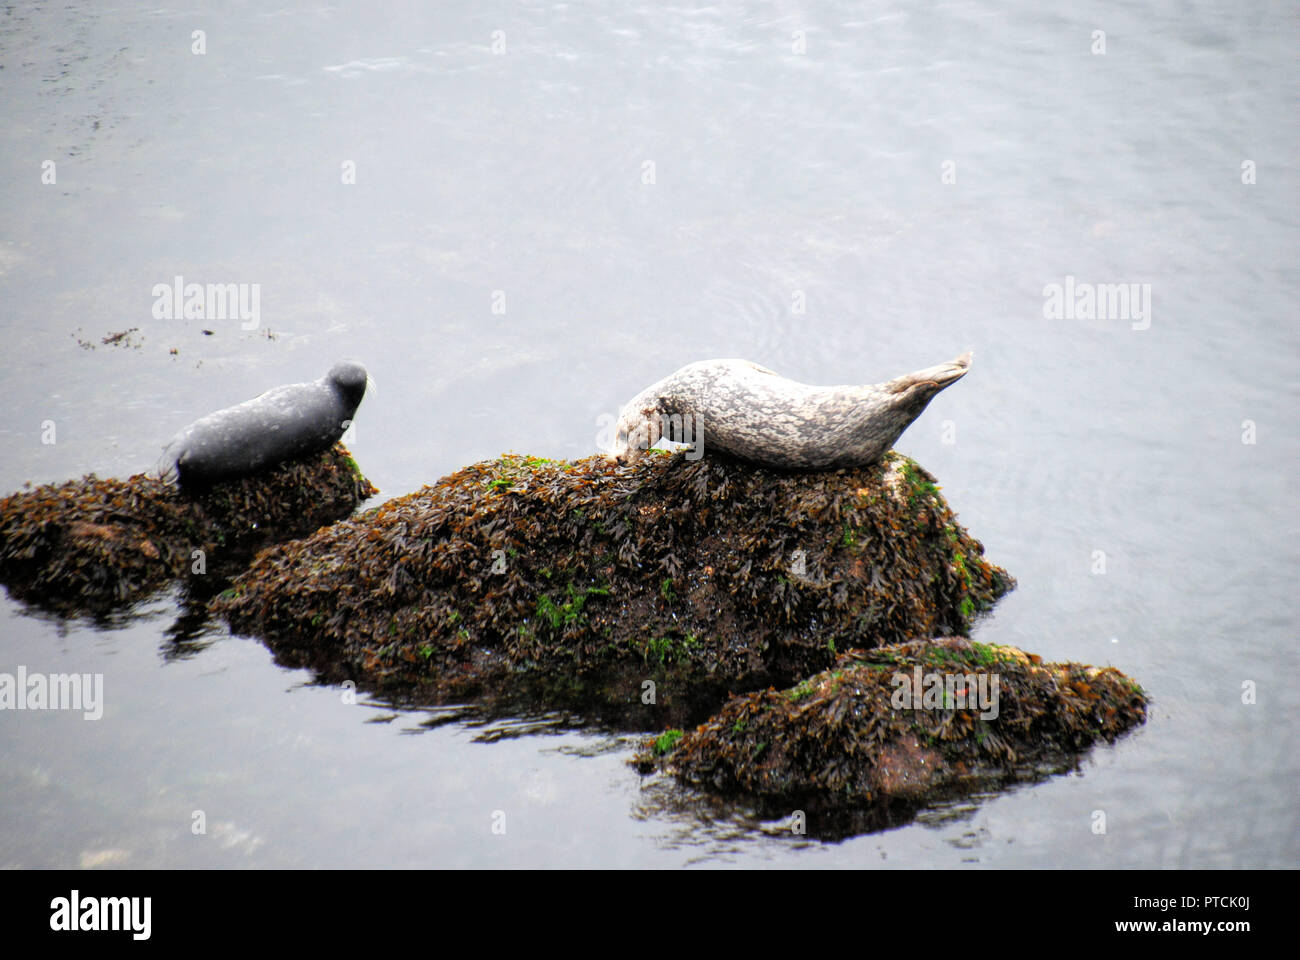 Two curious and cute Pacific harbor seals, one grey and one white and brown, resting on a rock in the sea in Horseshoe Bay, BC, Canada Stock Photo